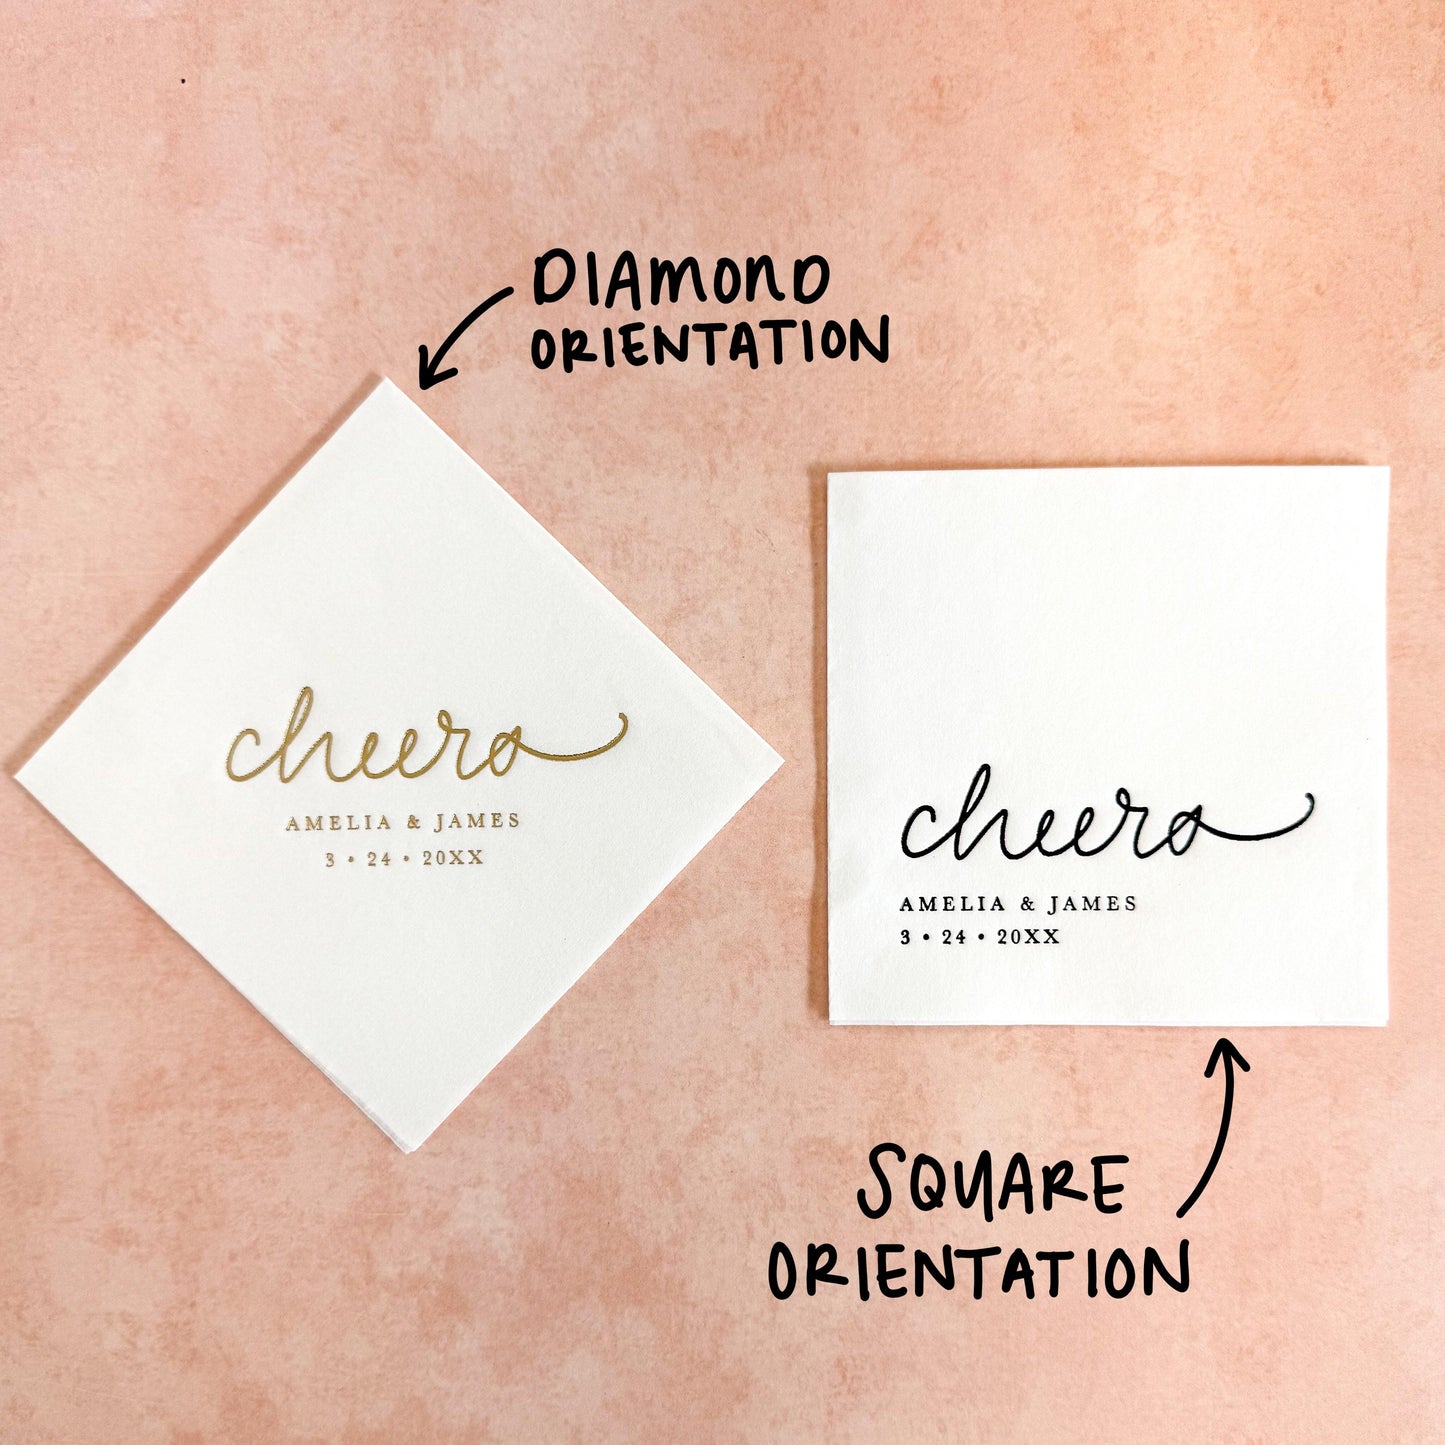 Cheers Personalized Cocktail Napkins - Plum Grove Design